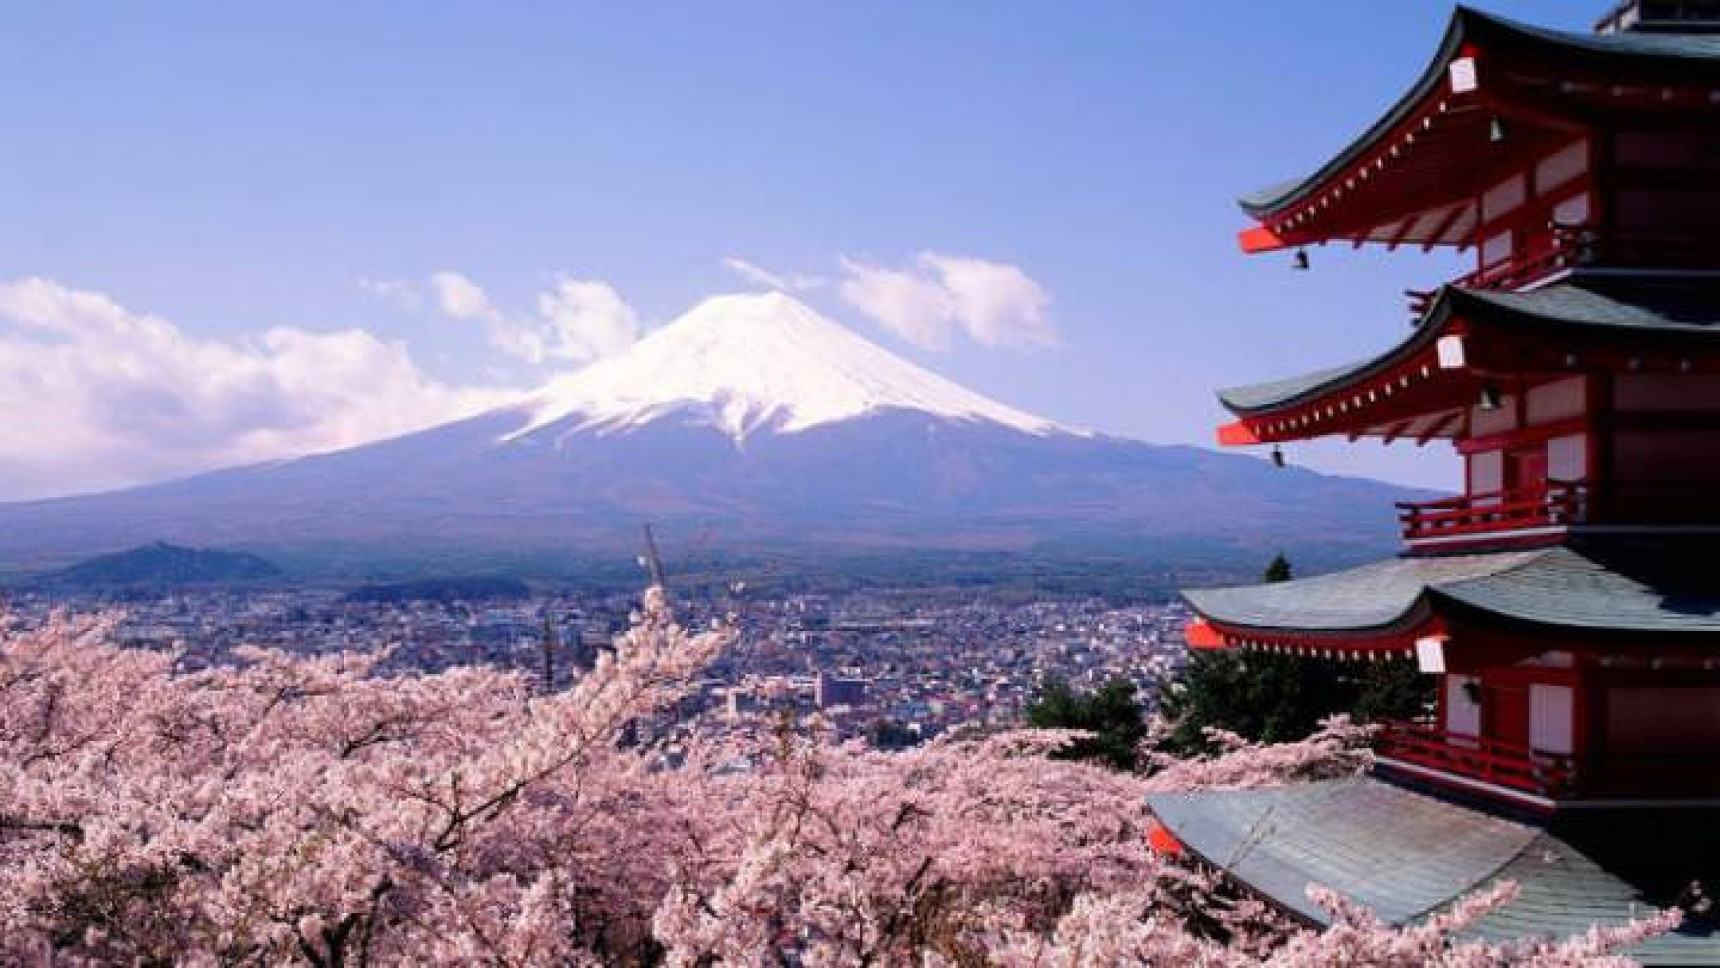 Mount Fuji from a distance in Cherry Blossom season